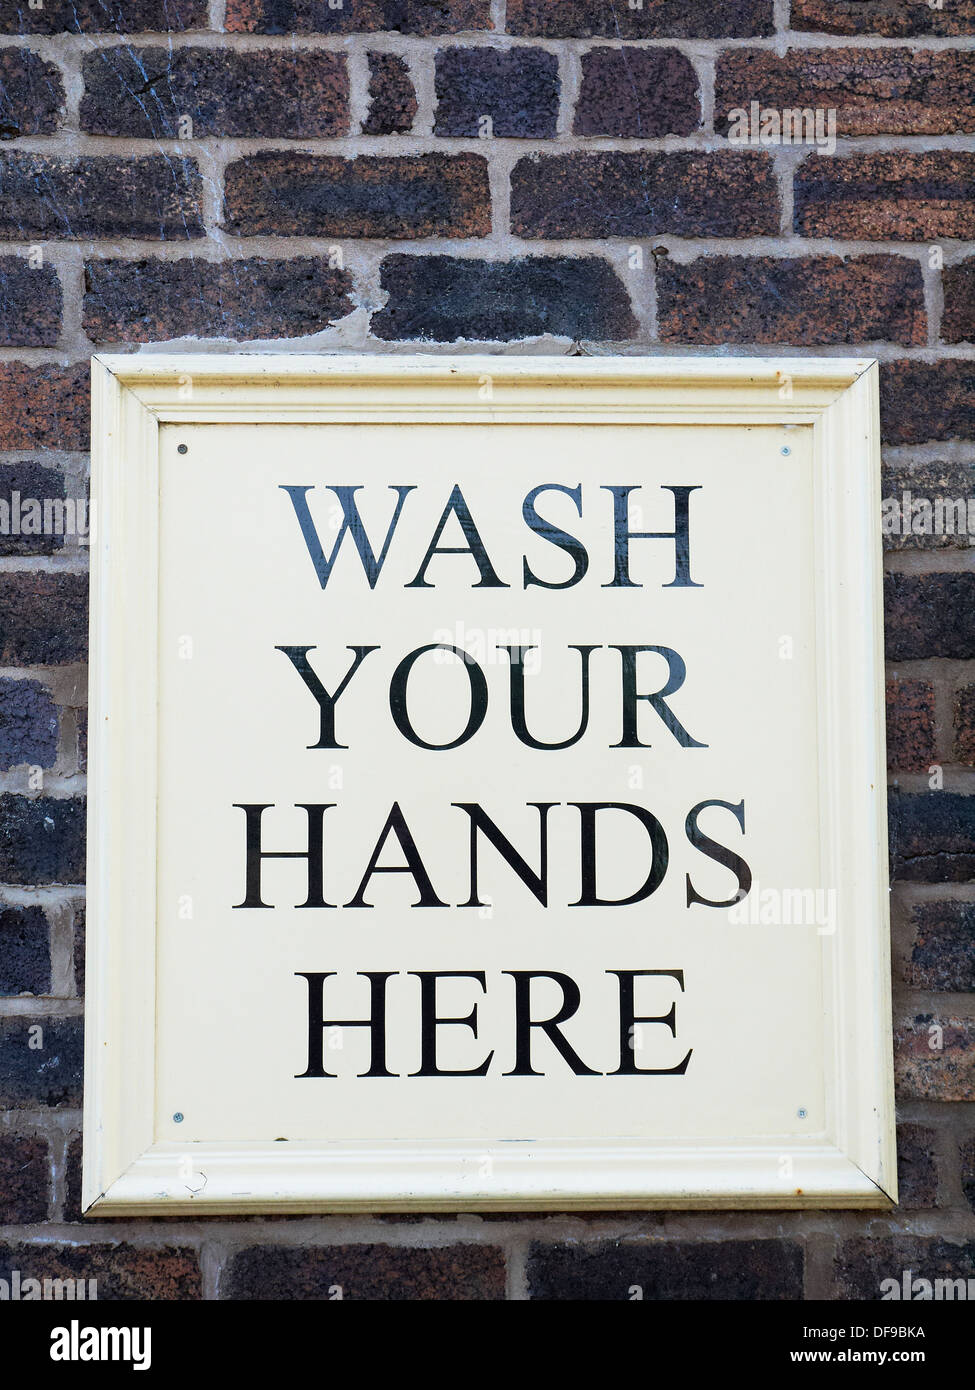 Wash your hands here sign on outside wall UK Stock Photo